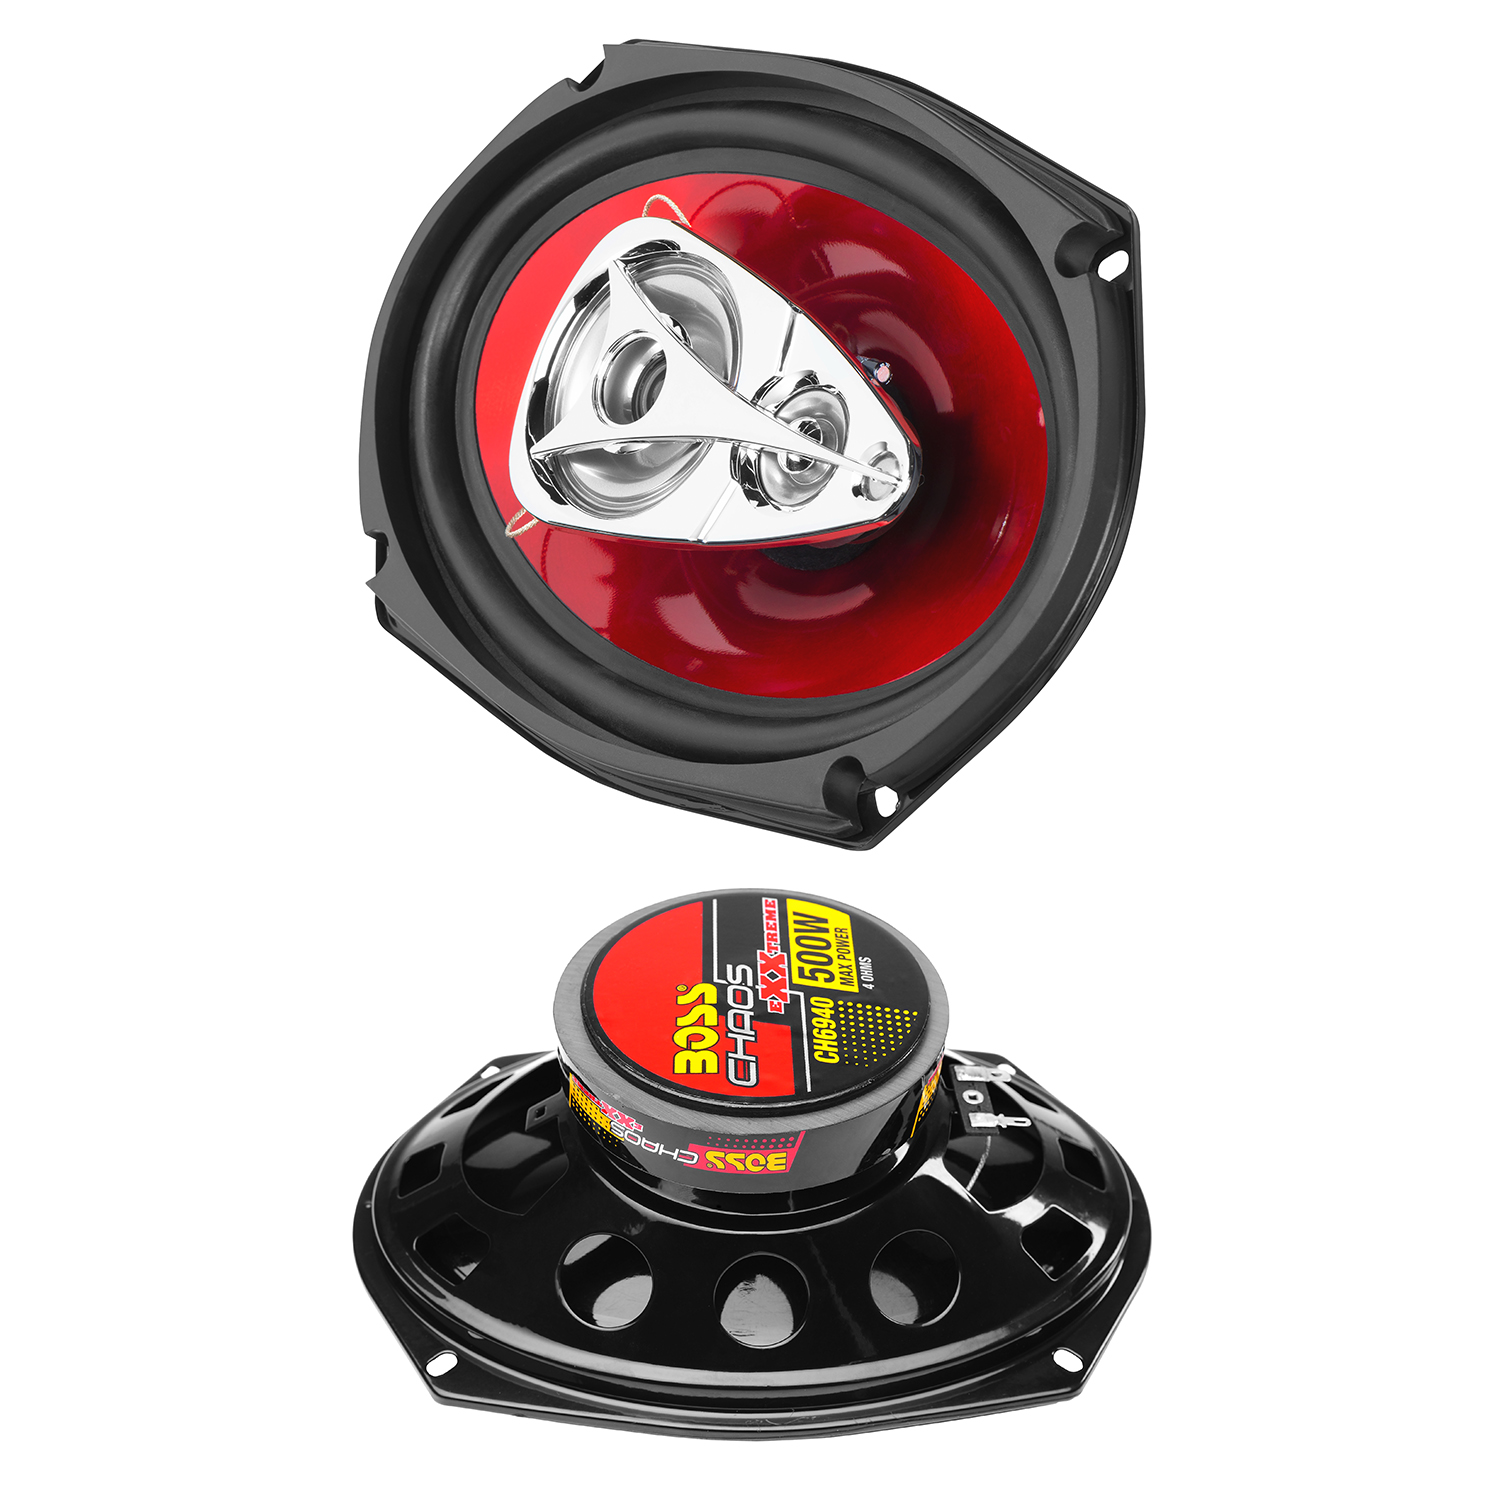 BOSS Audio Systems CH6940 Chaos Series 6 x 9 inch Car Stereo Door Speakers - 500 Watts Max, 4 Way, Full Range Audio, Tweeters, Coaxial, Sold in Pairs - image 3 of 9